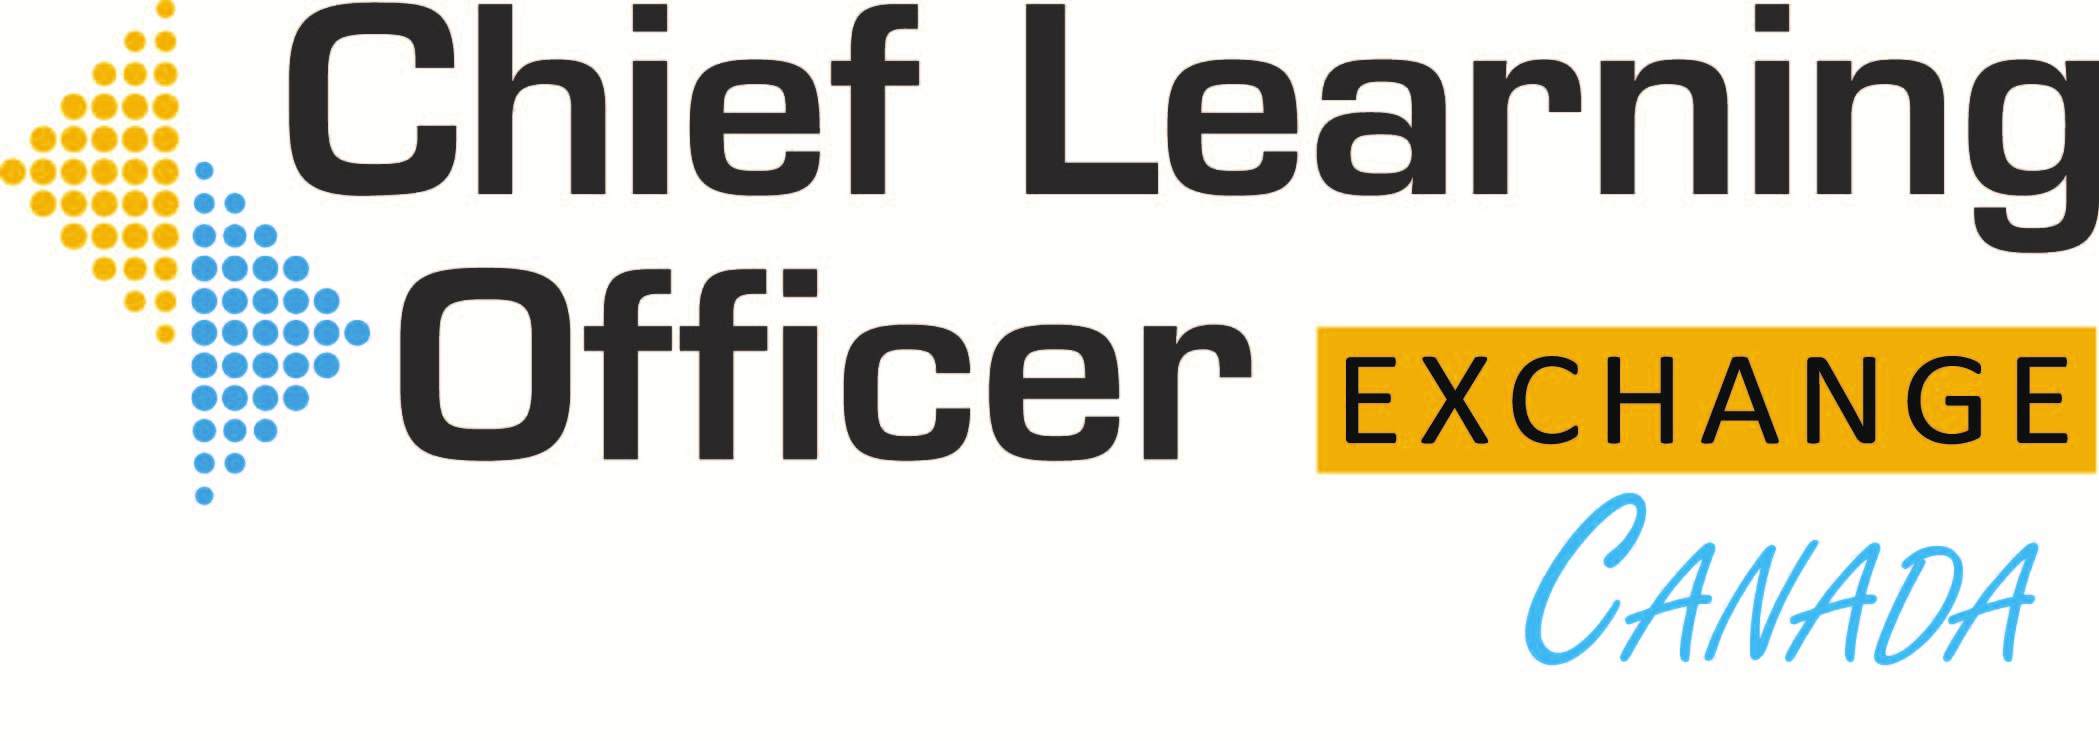 Chief Learning Officer Exchange Canada